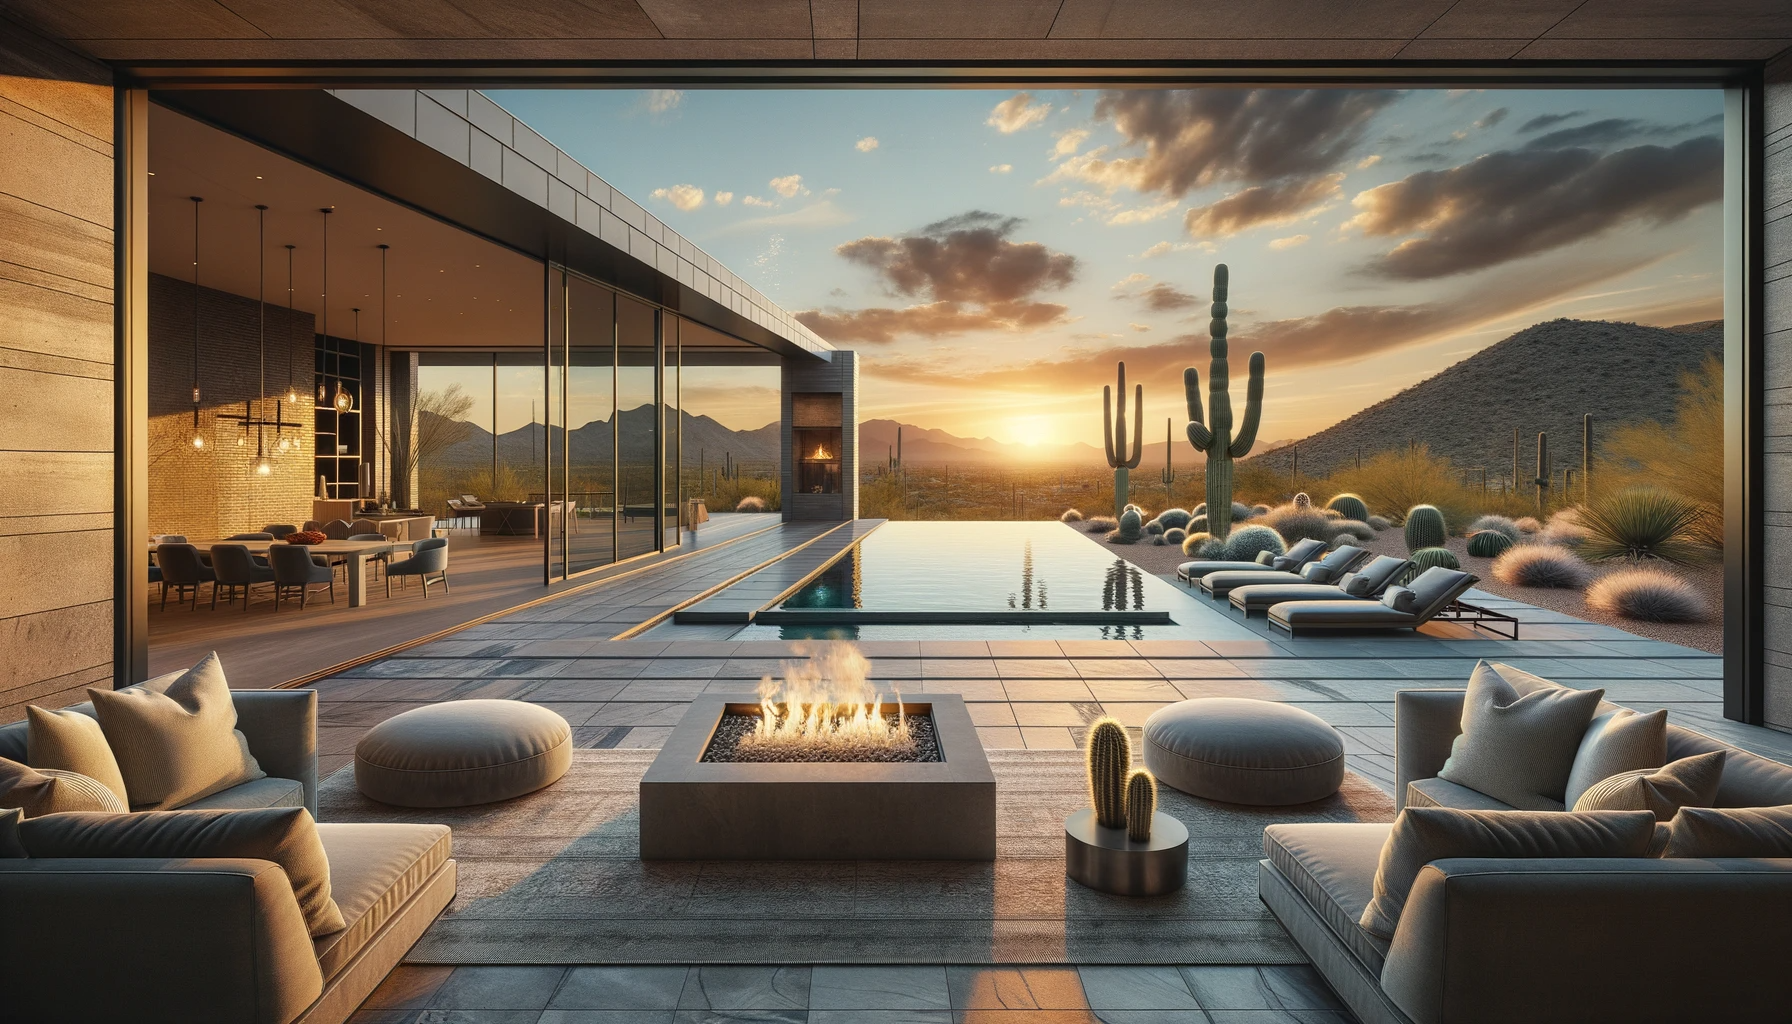 Natural Stone Pavers - image of a modern luxurious home showcasing the living room with a retractable wall that blends the indoor space with the outdoors